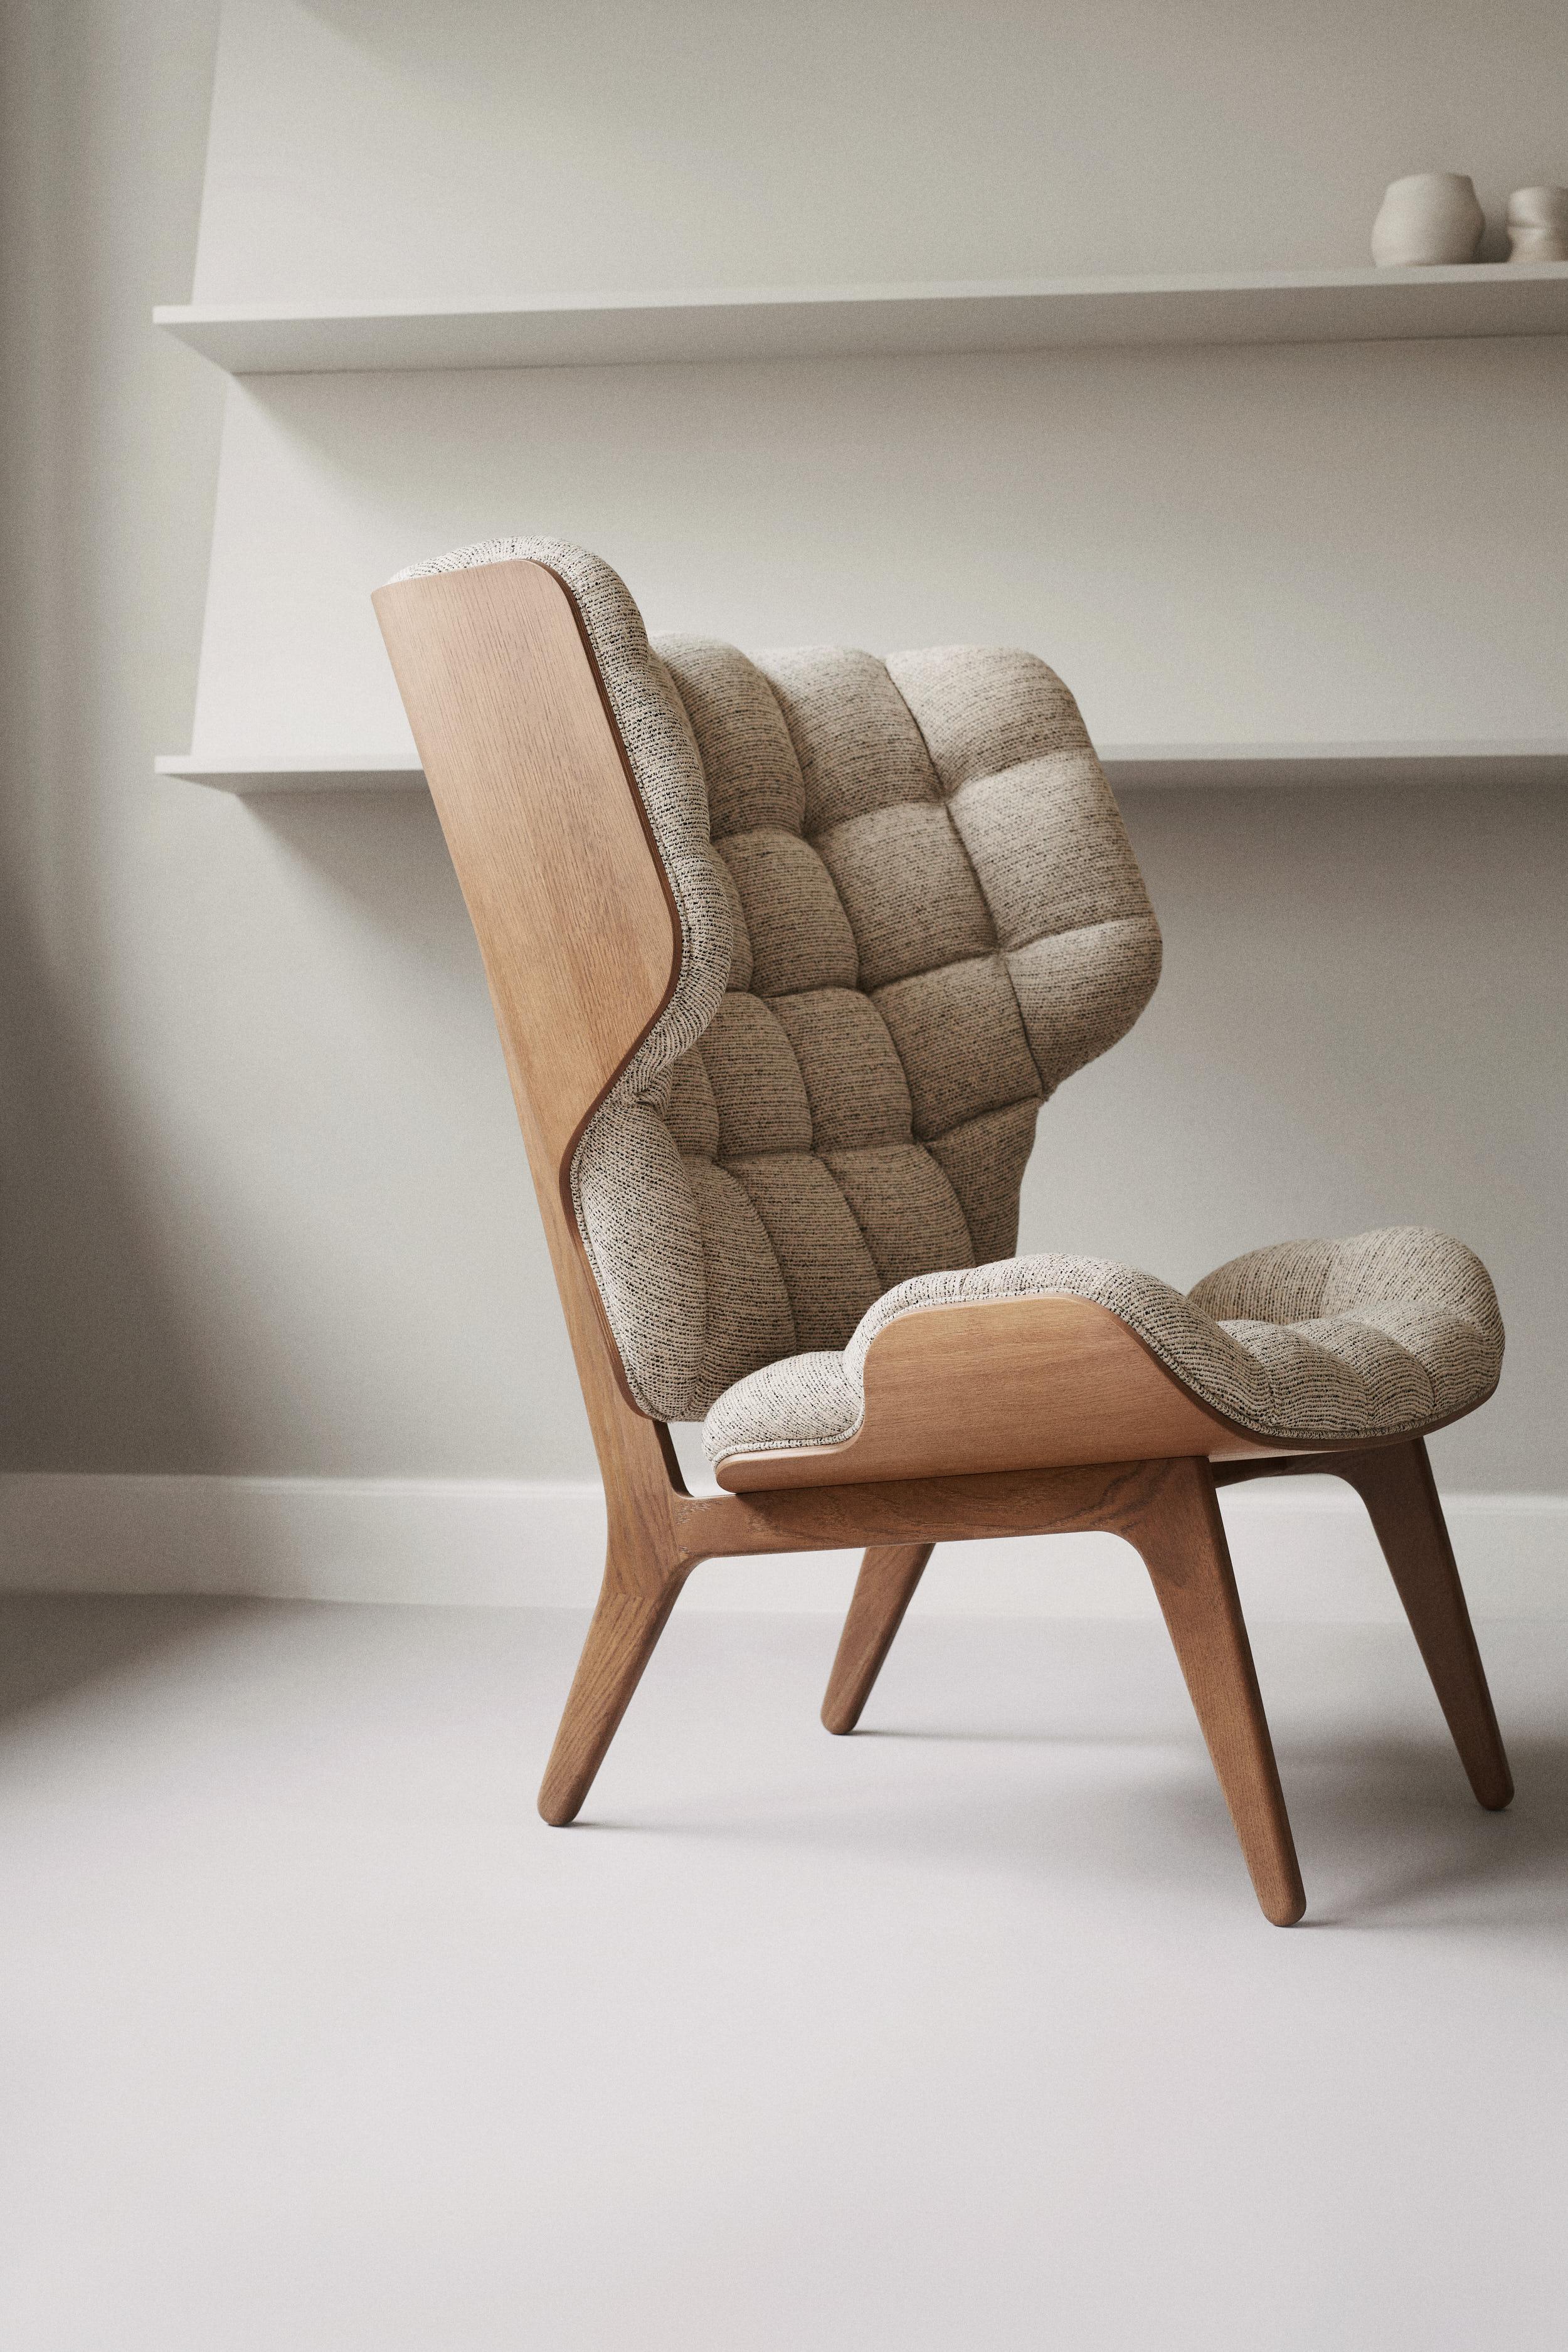 Contemporary Chair 'Mammoth' by Norr11, Light Smoked Oak, Fame 61003 In New Condition For Sale In Paris, FR